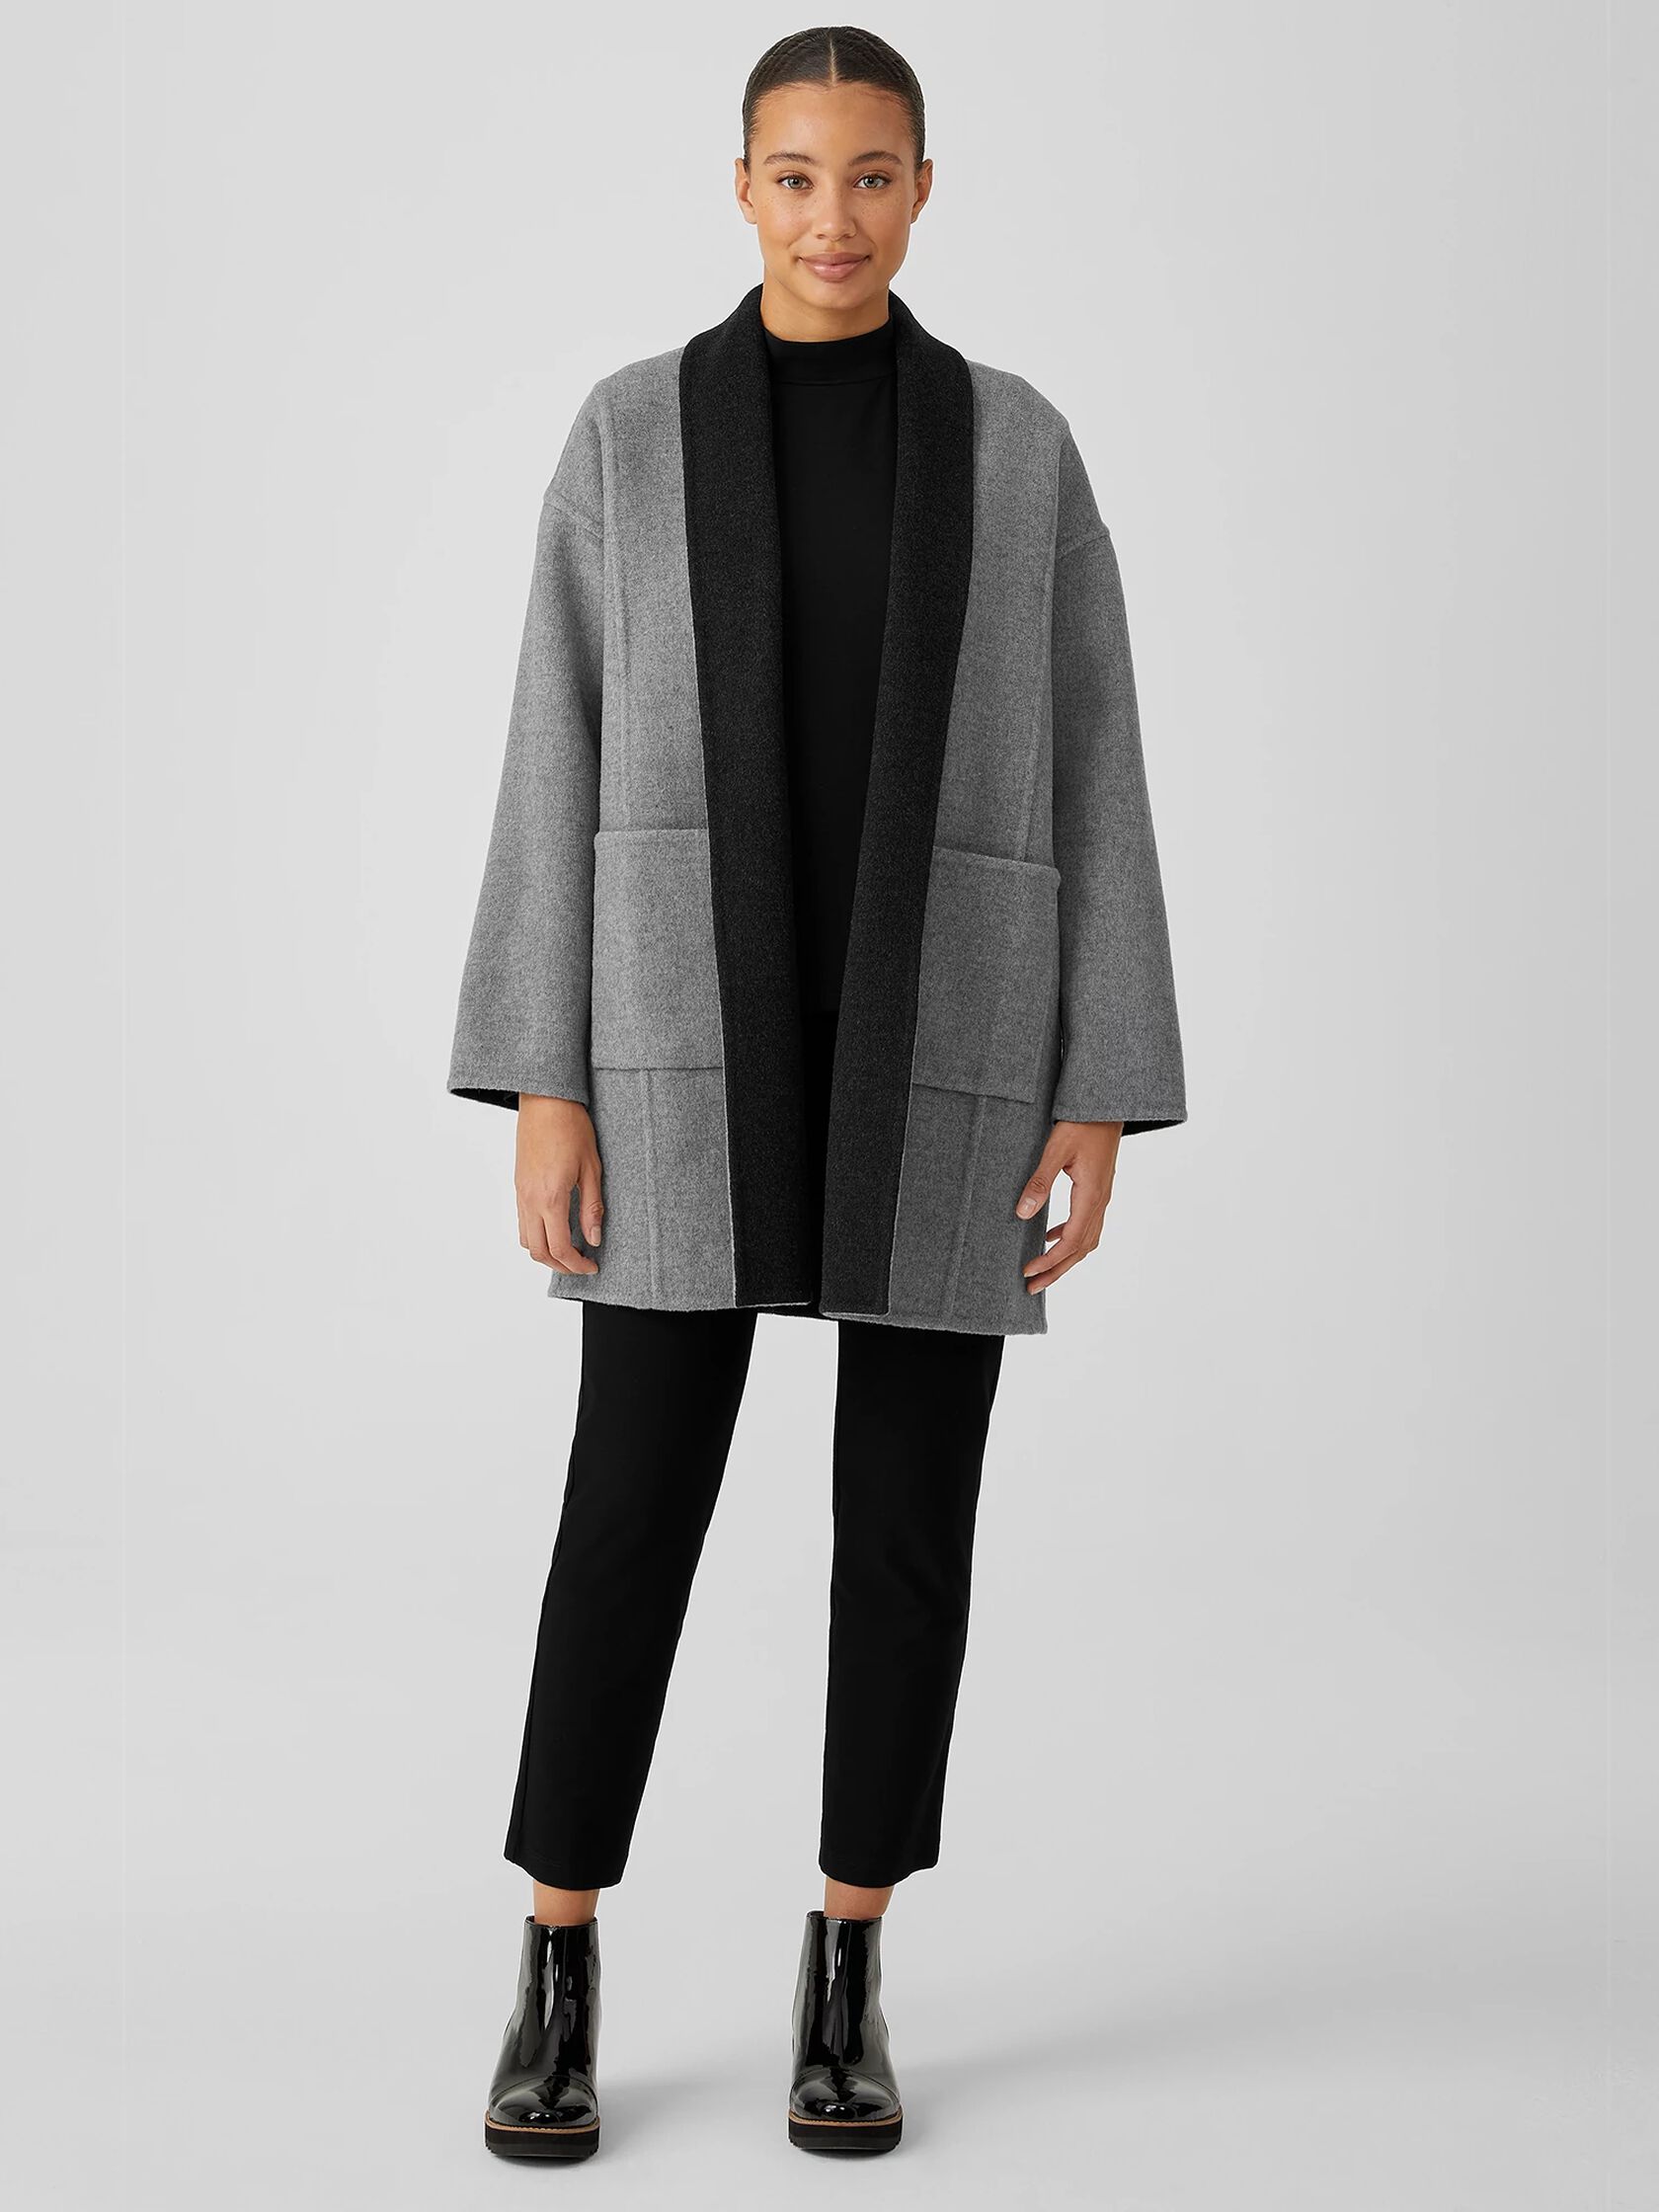 Eileen Fisher Doubleface Wool Cloud Hooded Coat in Natural